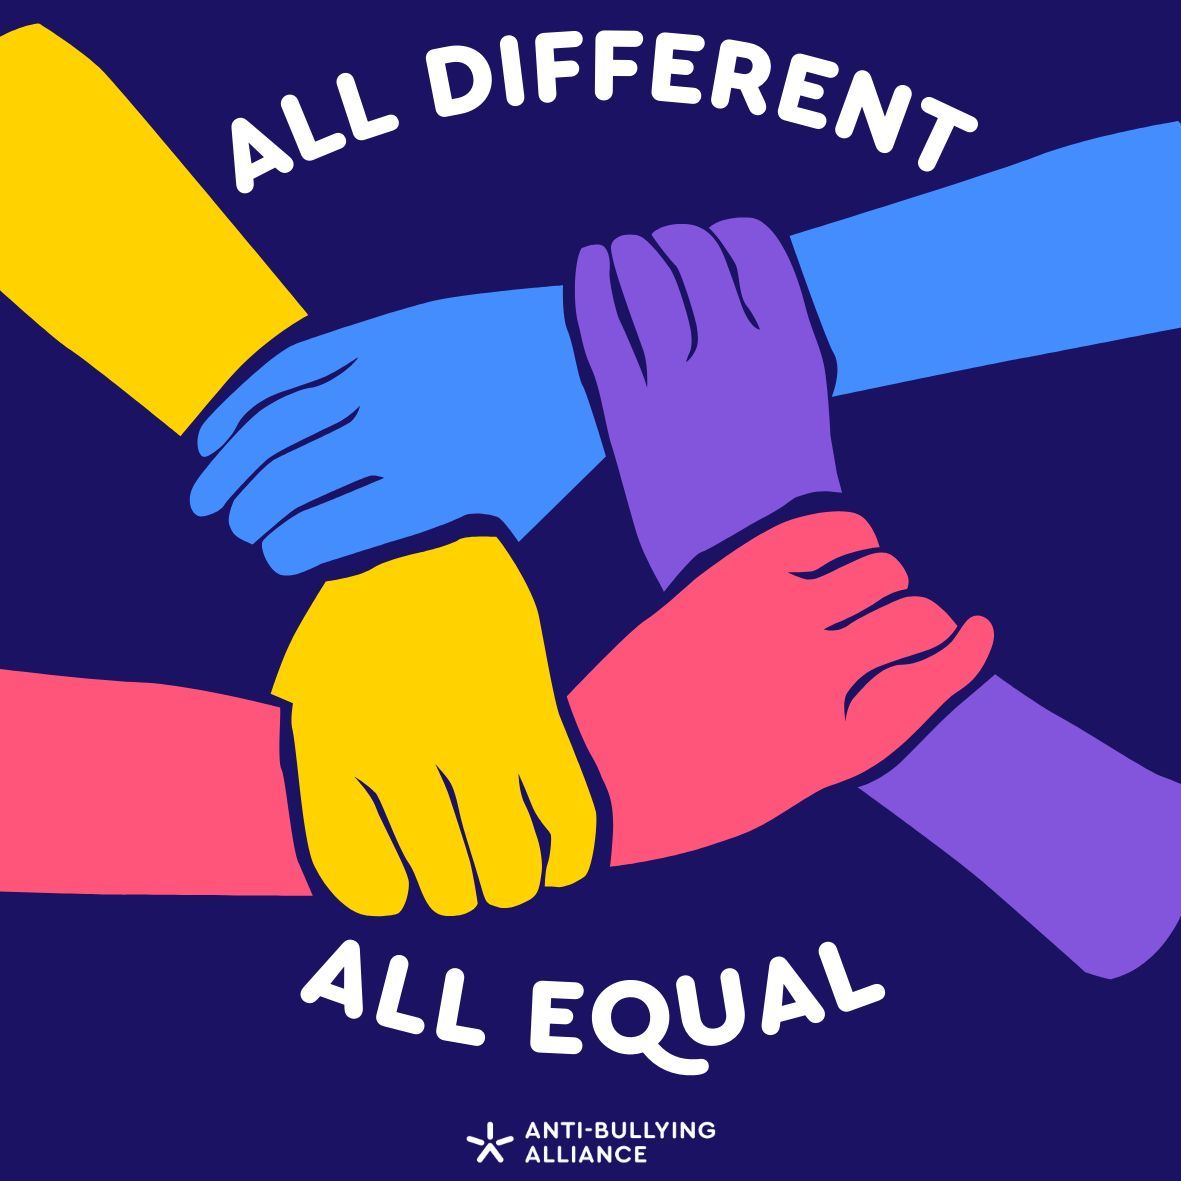 Happy #CelebrateDiversityMonth! 🙌

Children are often bullied for perceived differences. It is vital that to prevent bullying we celebrate the differences in ALL students and staff. #AllDifferentAllEqual

Find out more here: anti-bullyingalliance.org.uk/tools-informat…